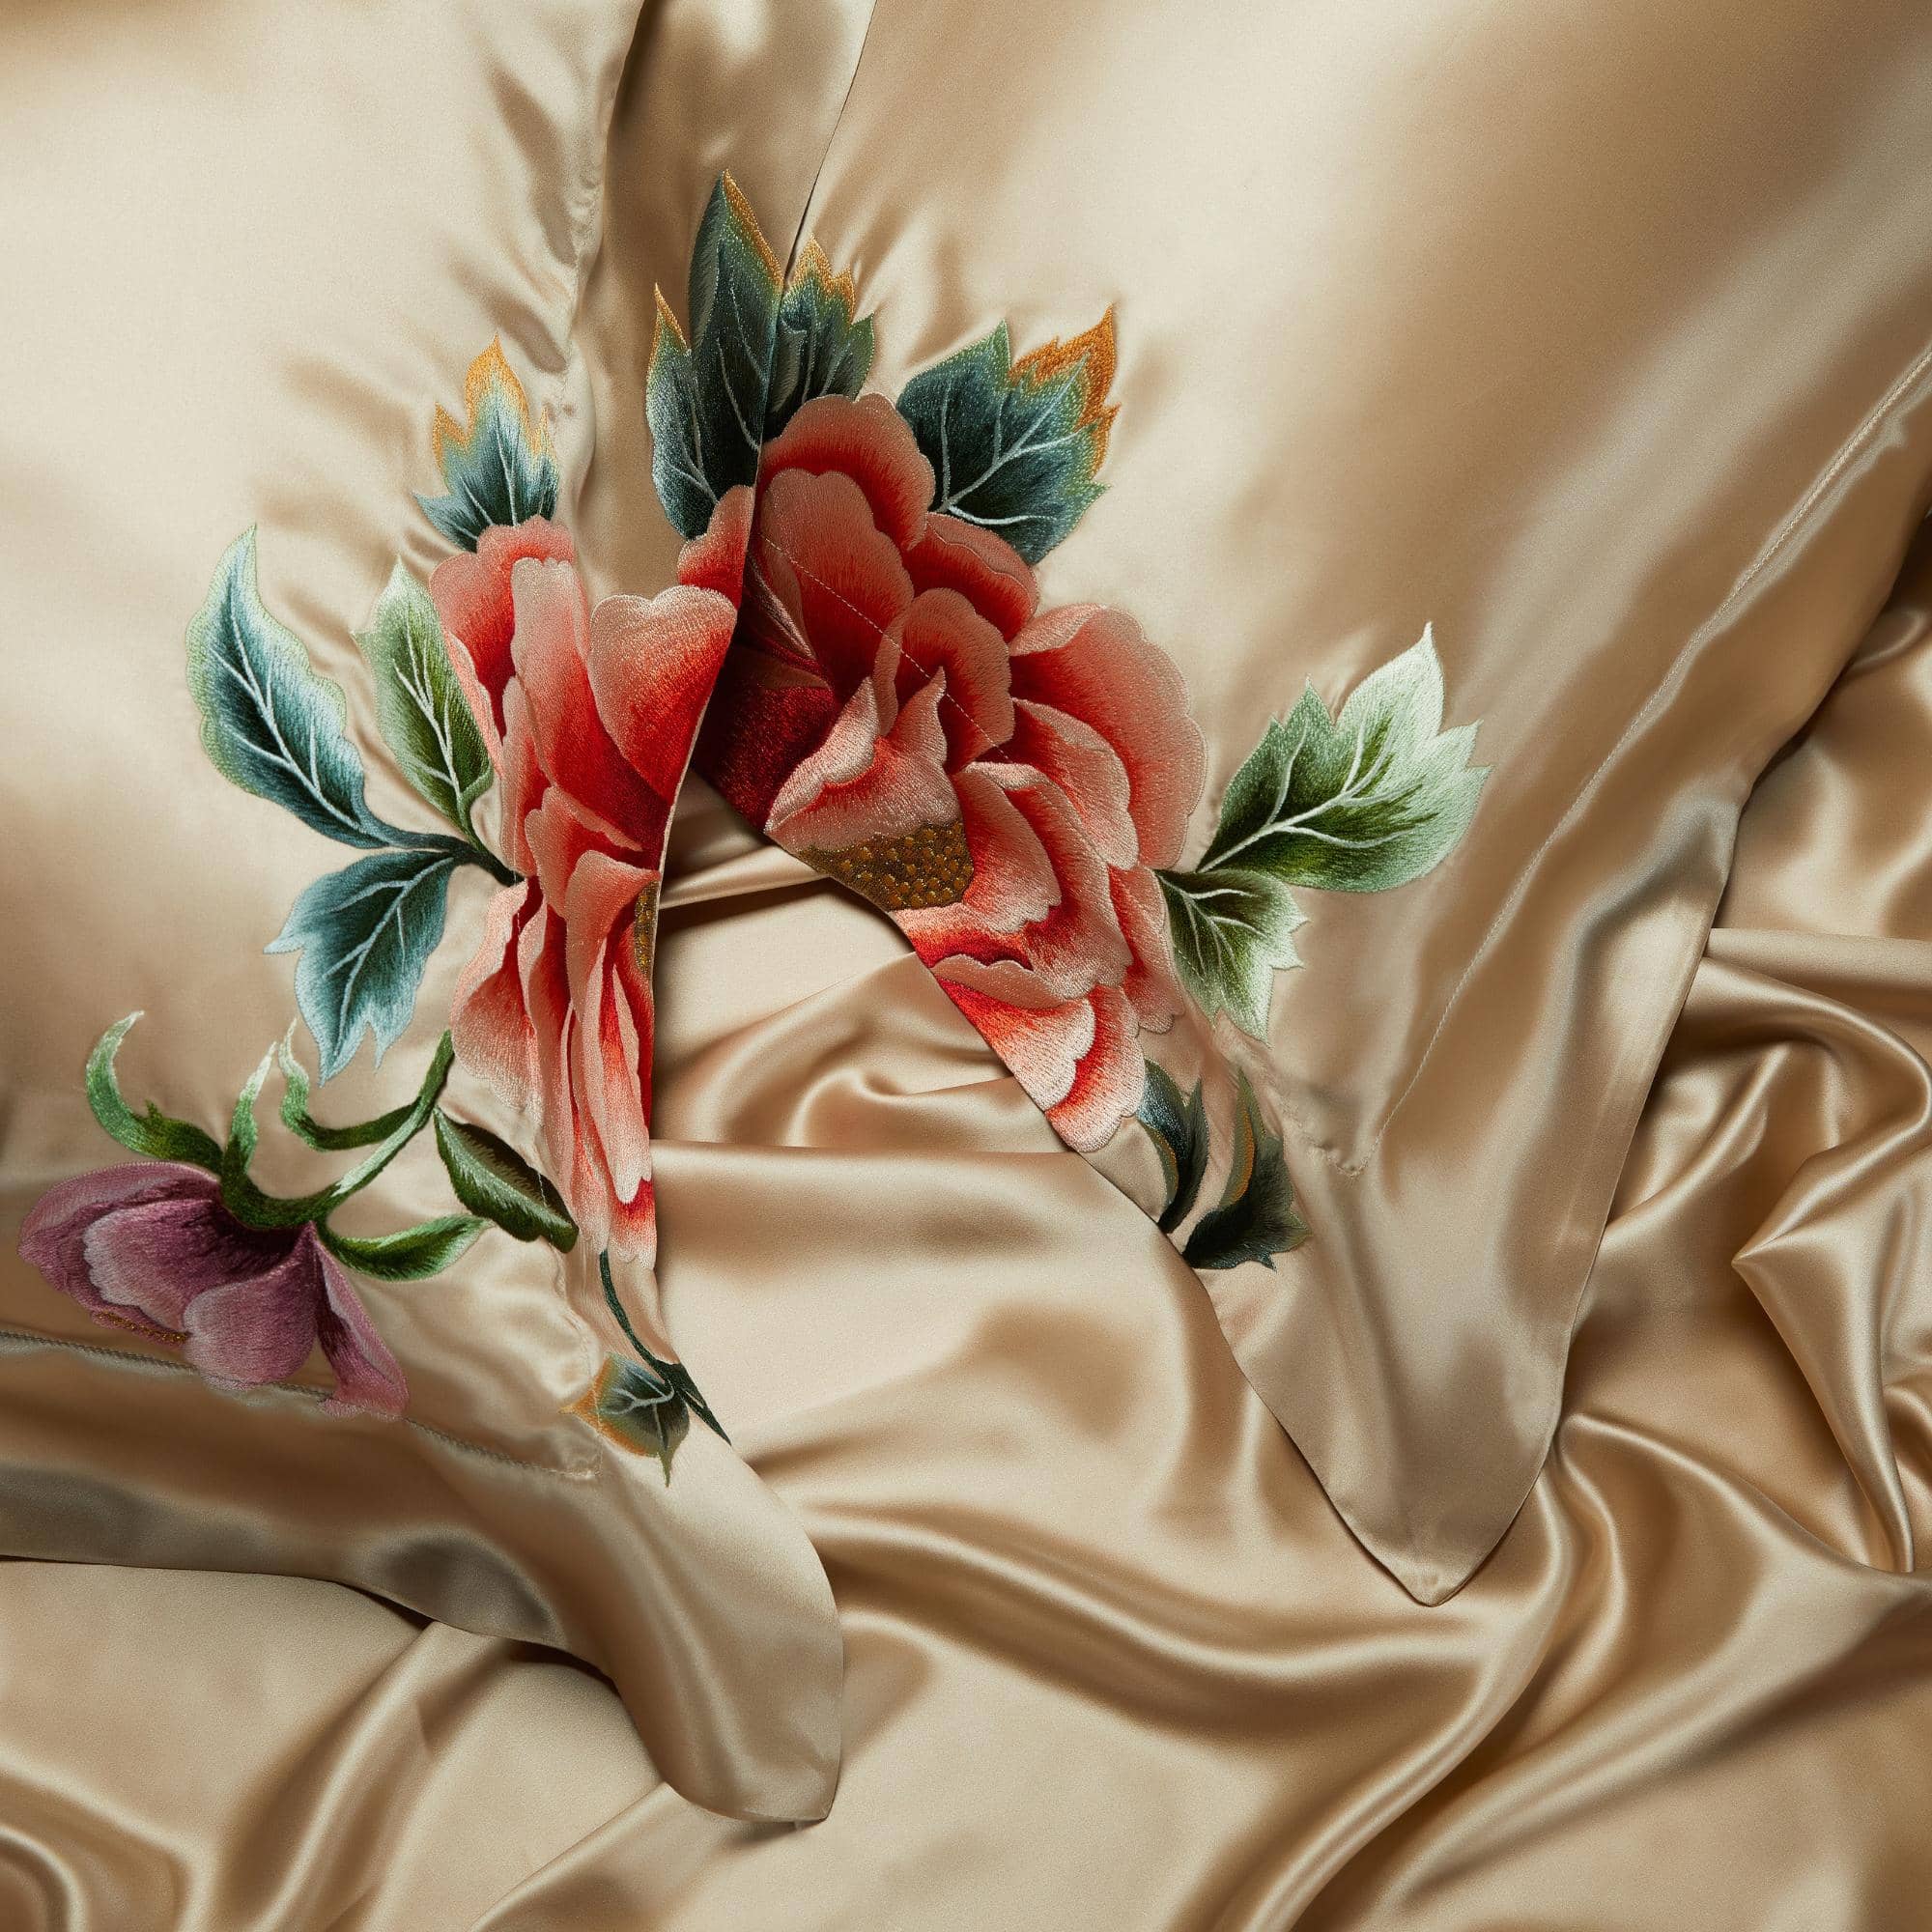 Luxury hand Embroidered 4 Psc 22 MM Pure Real Mulberry Silk Bedding Set in Gold Roses Flowers Floral Duvet